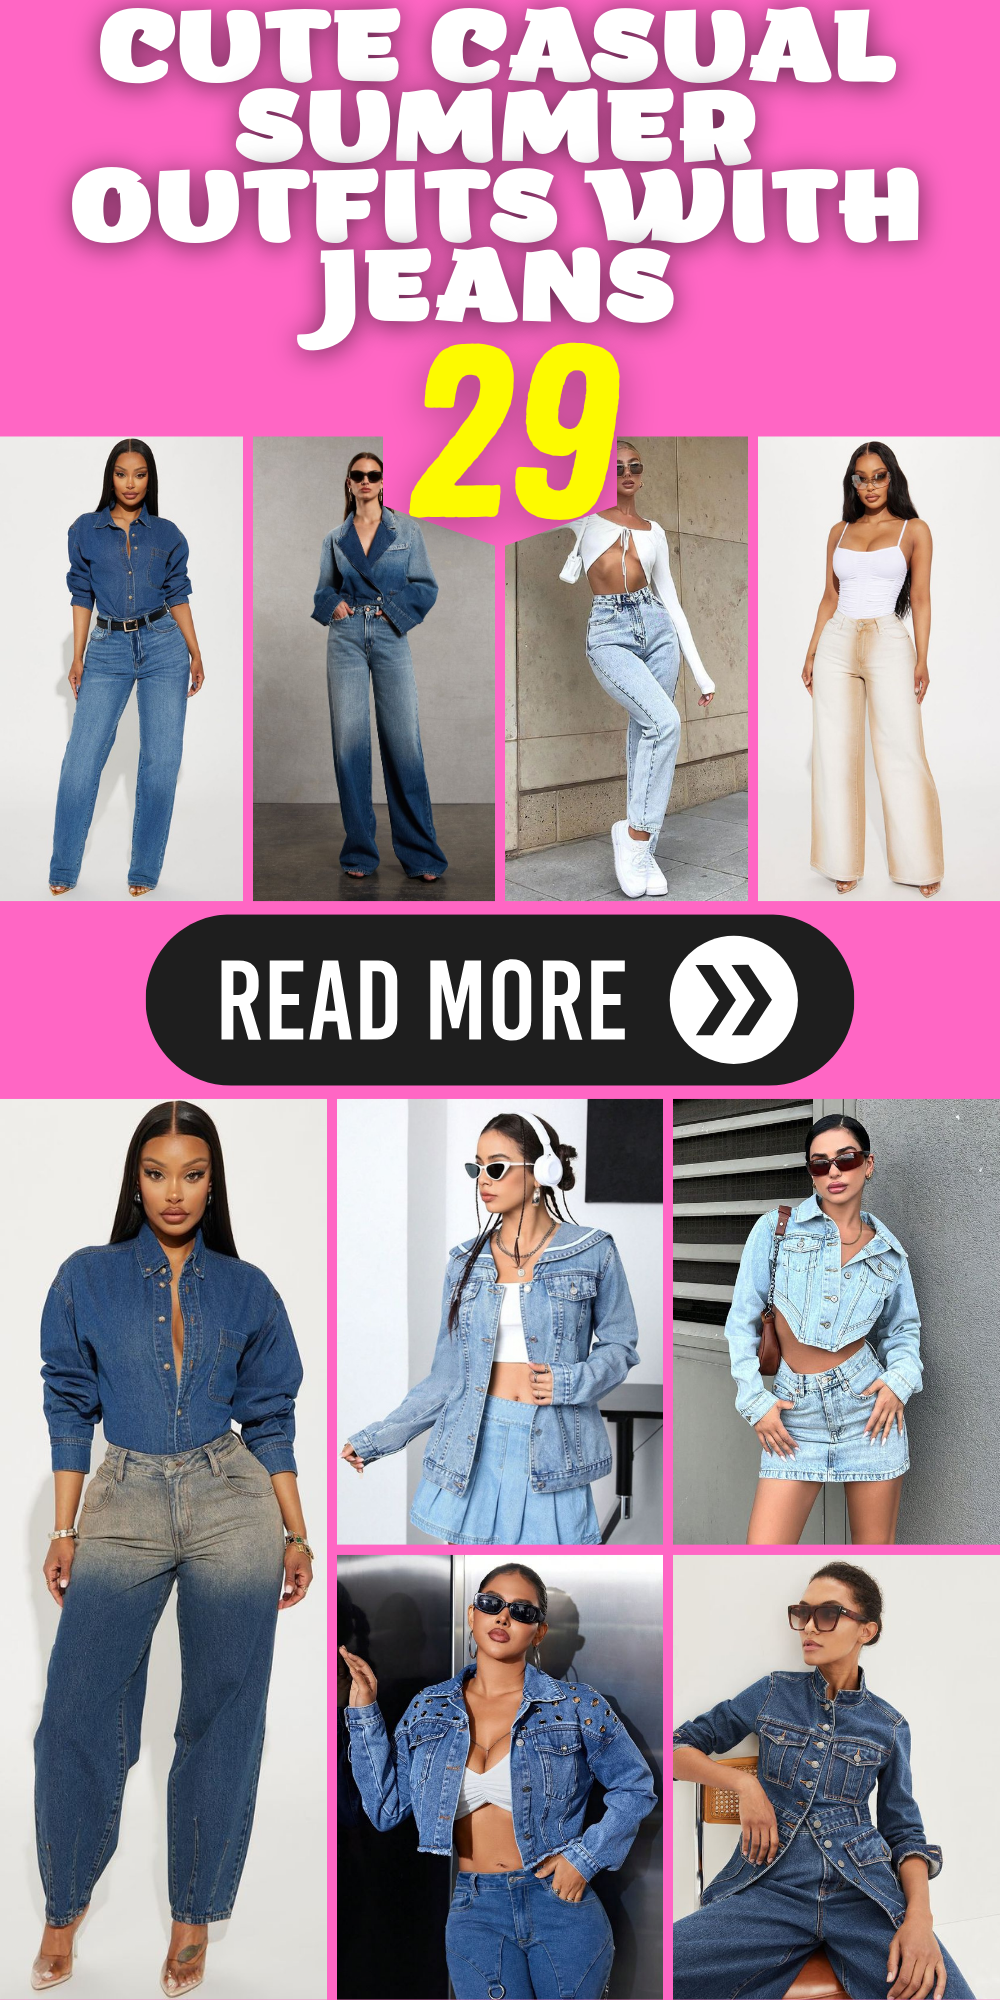 29 Cute Casual Summer Outfits with Jeans: Effortlessly Stylish Looks for Any Occasion